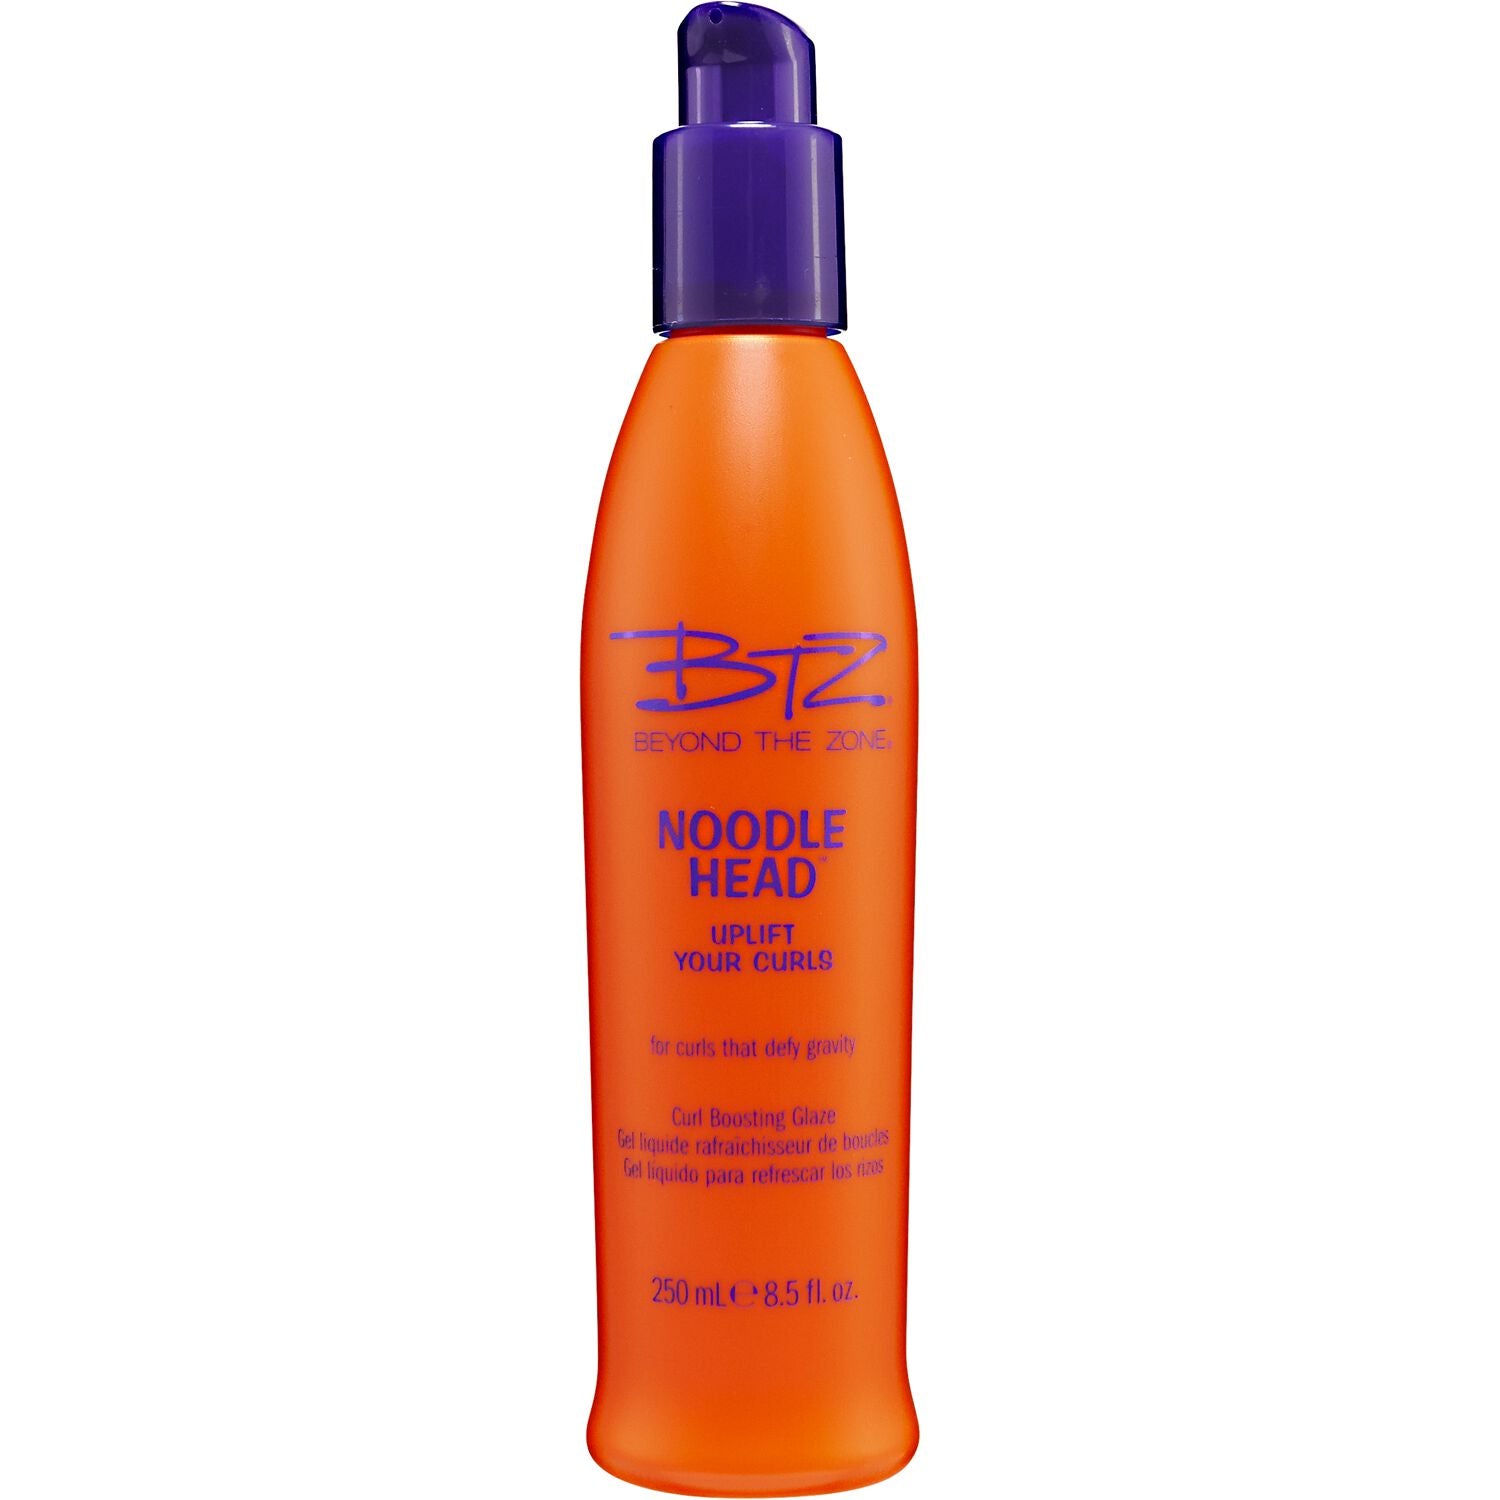 Noodle Head  by   Beyond the Zone Curl Boost Glaze